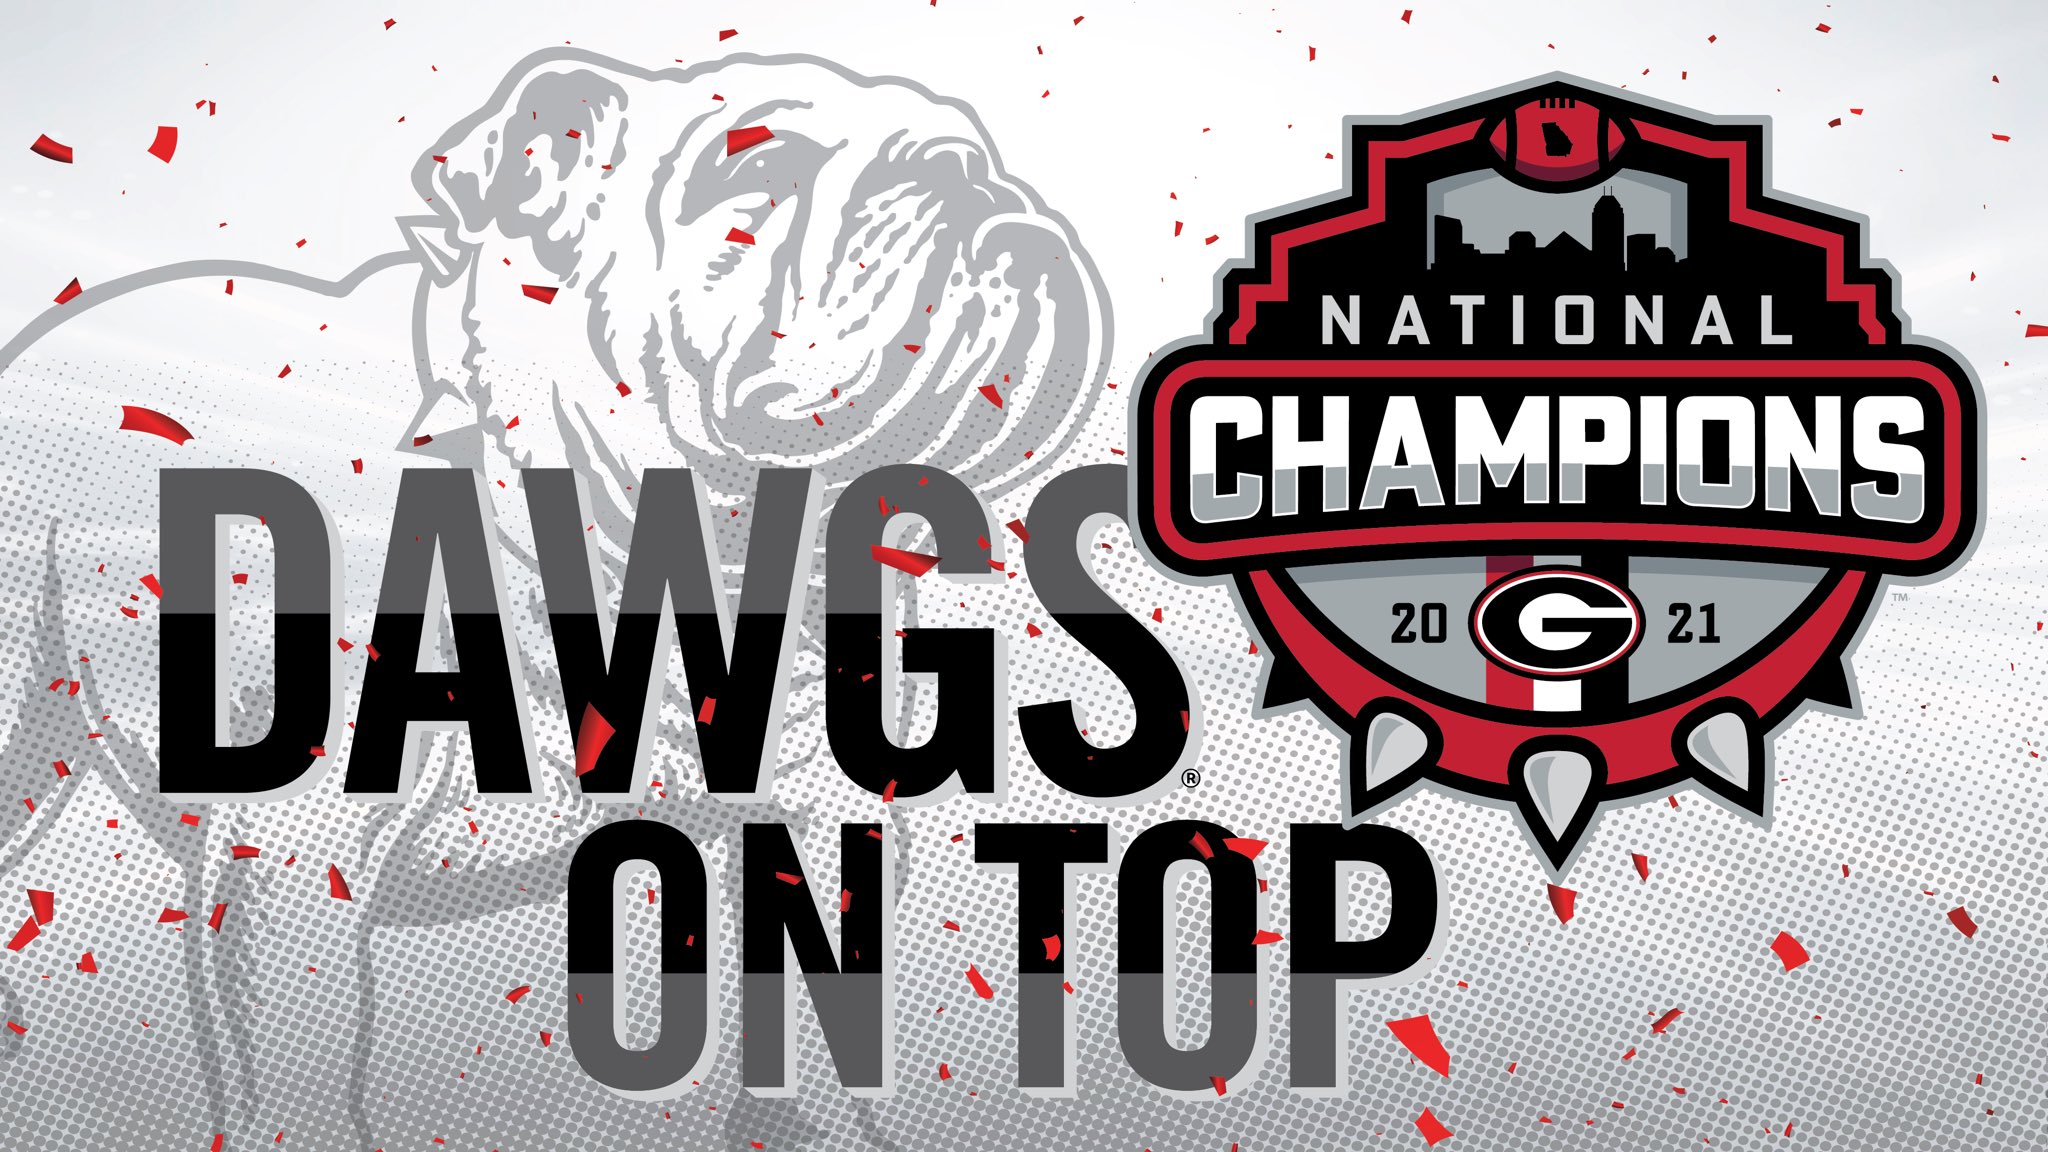 UGA on Twitter "YOUR BULLDOGS ARE NATIONAL CHAMPIONS! GoDawgs